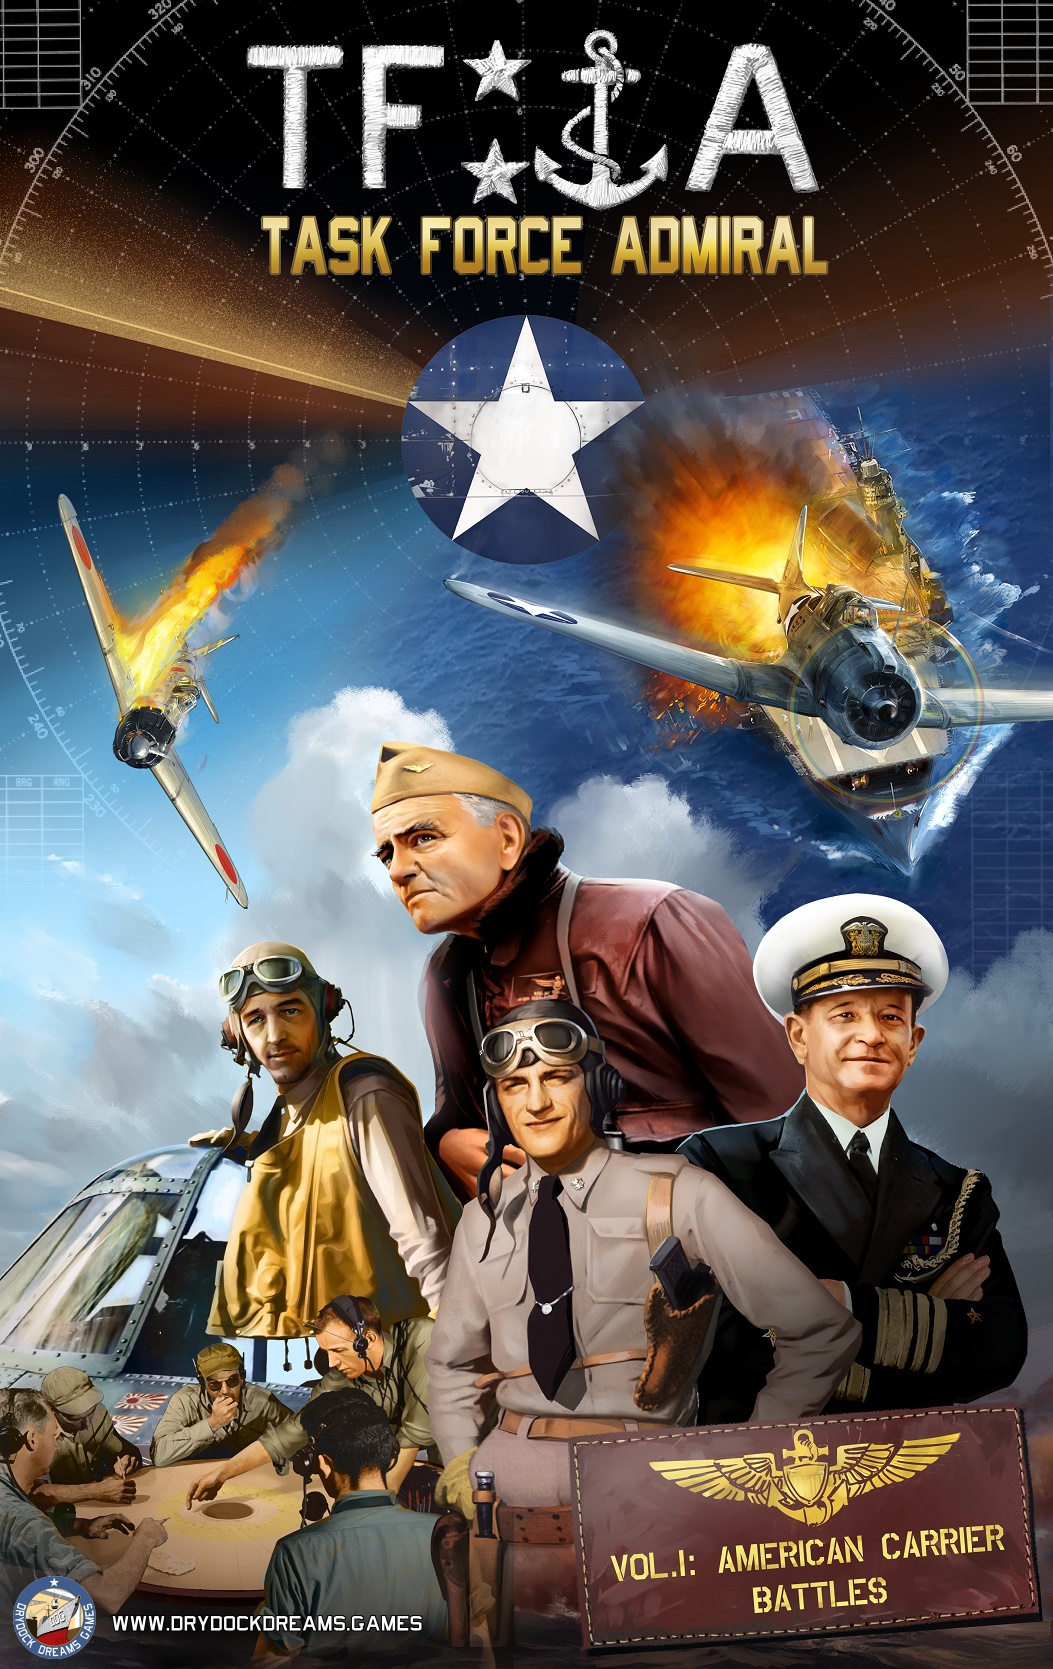 Cover Art for Task Force Admiral Vol.1 : American Carrier Battles By Drydock Dreams Games